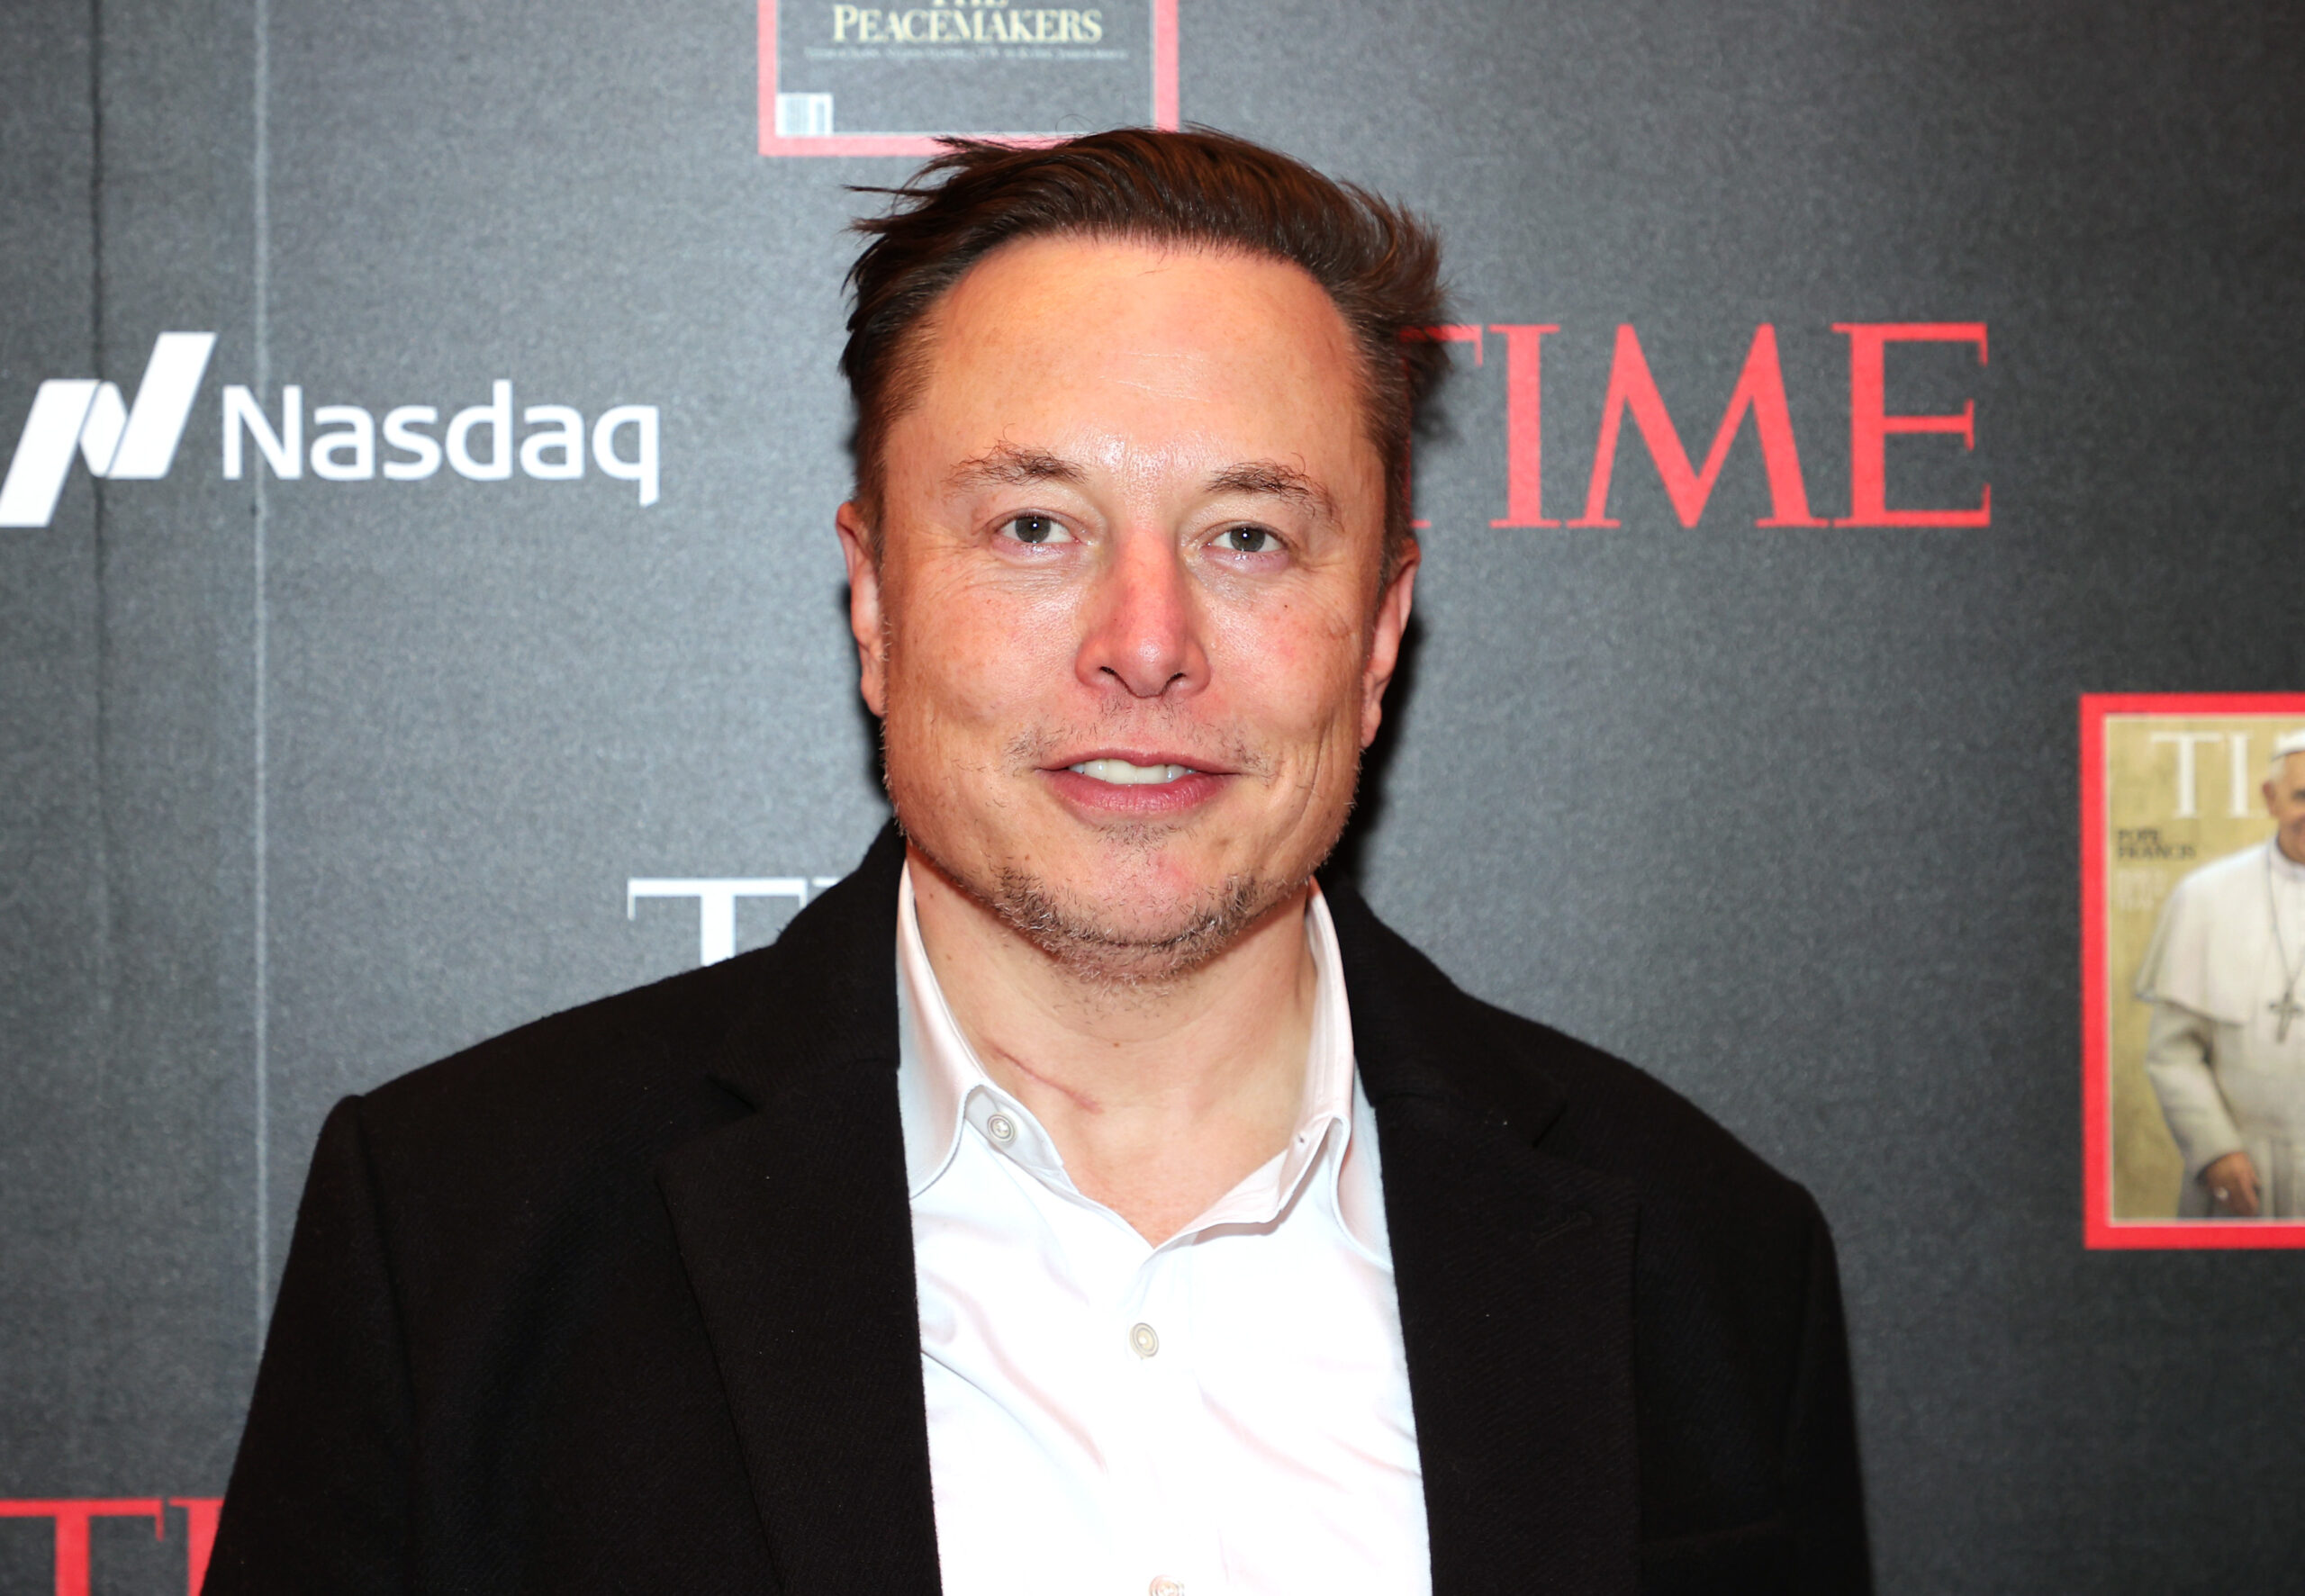 Free Speech Absolutist Elon Musk Reminds People He Laid Off That If They Disparage Him He May Sue Them